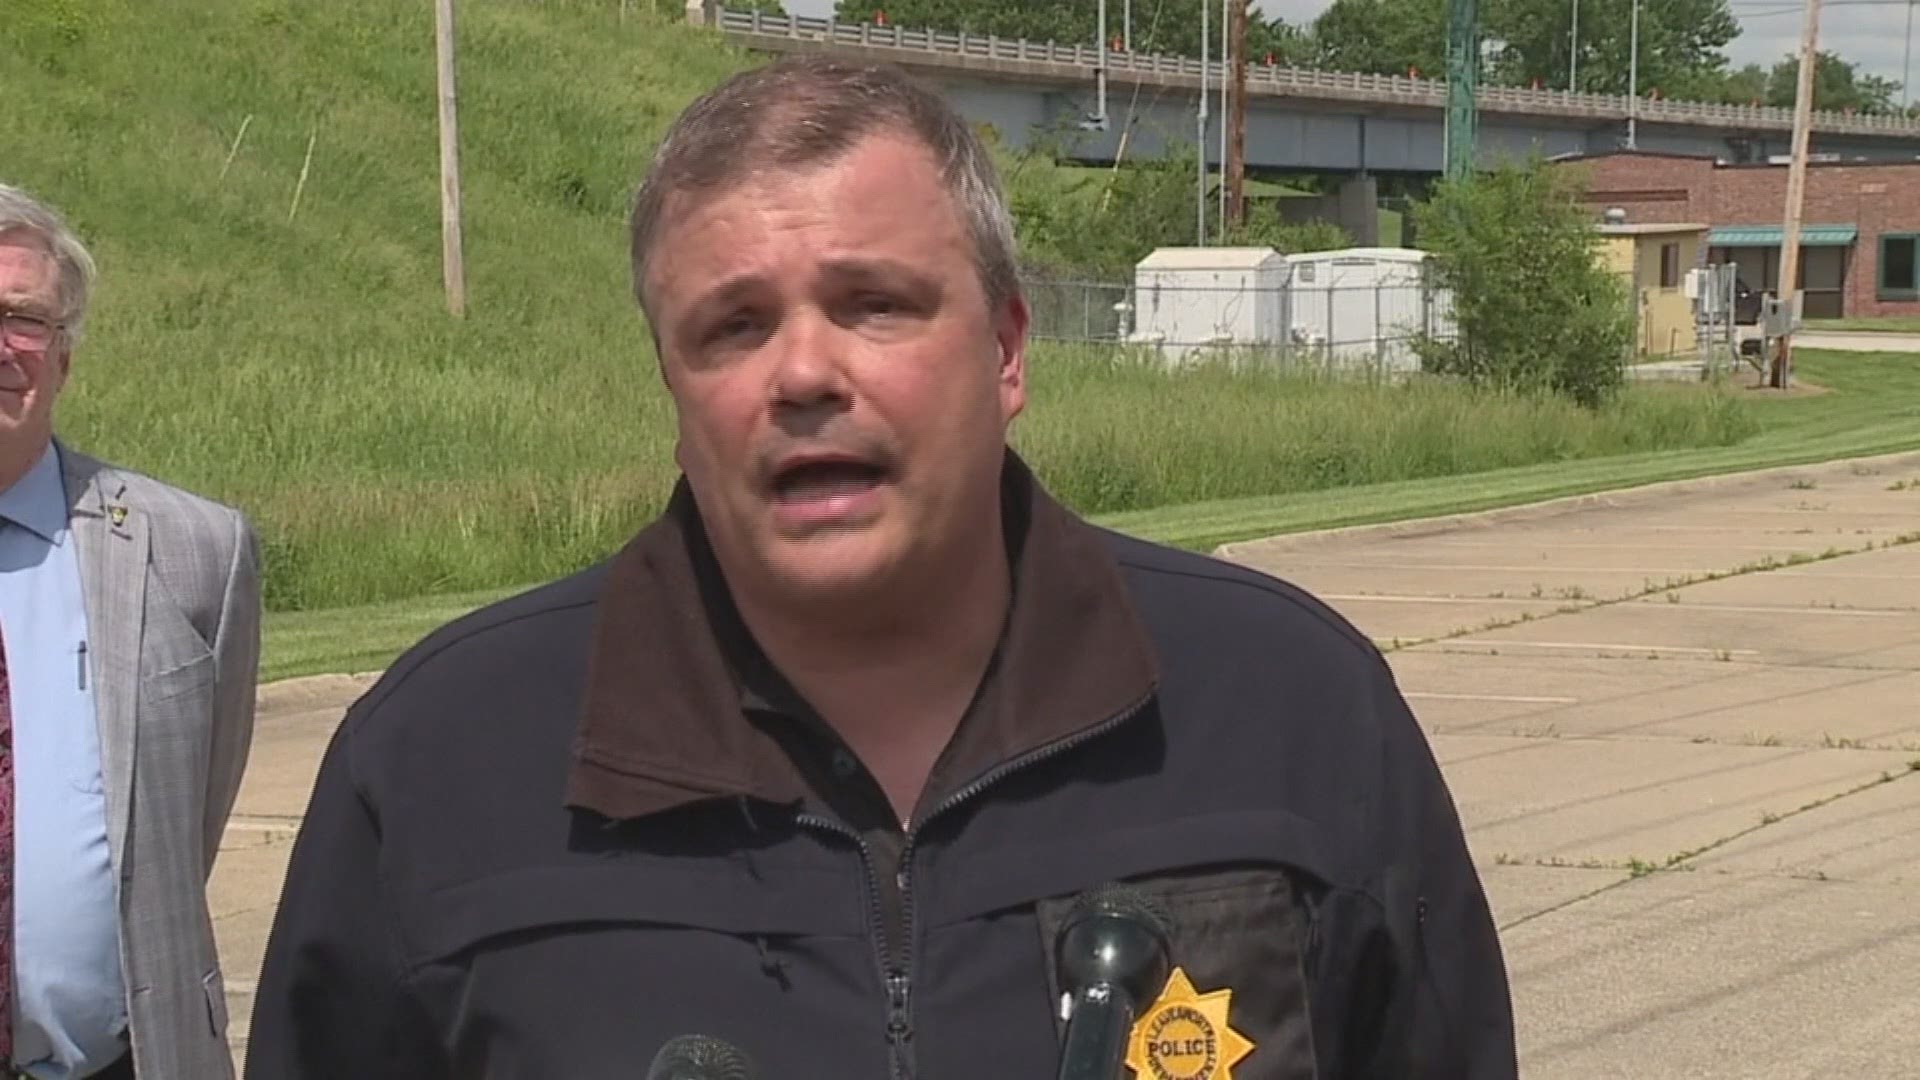 Leavenworth police chief Patrick Kitchens said the soldier ran the gunman over with his car